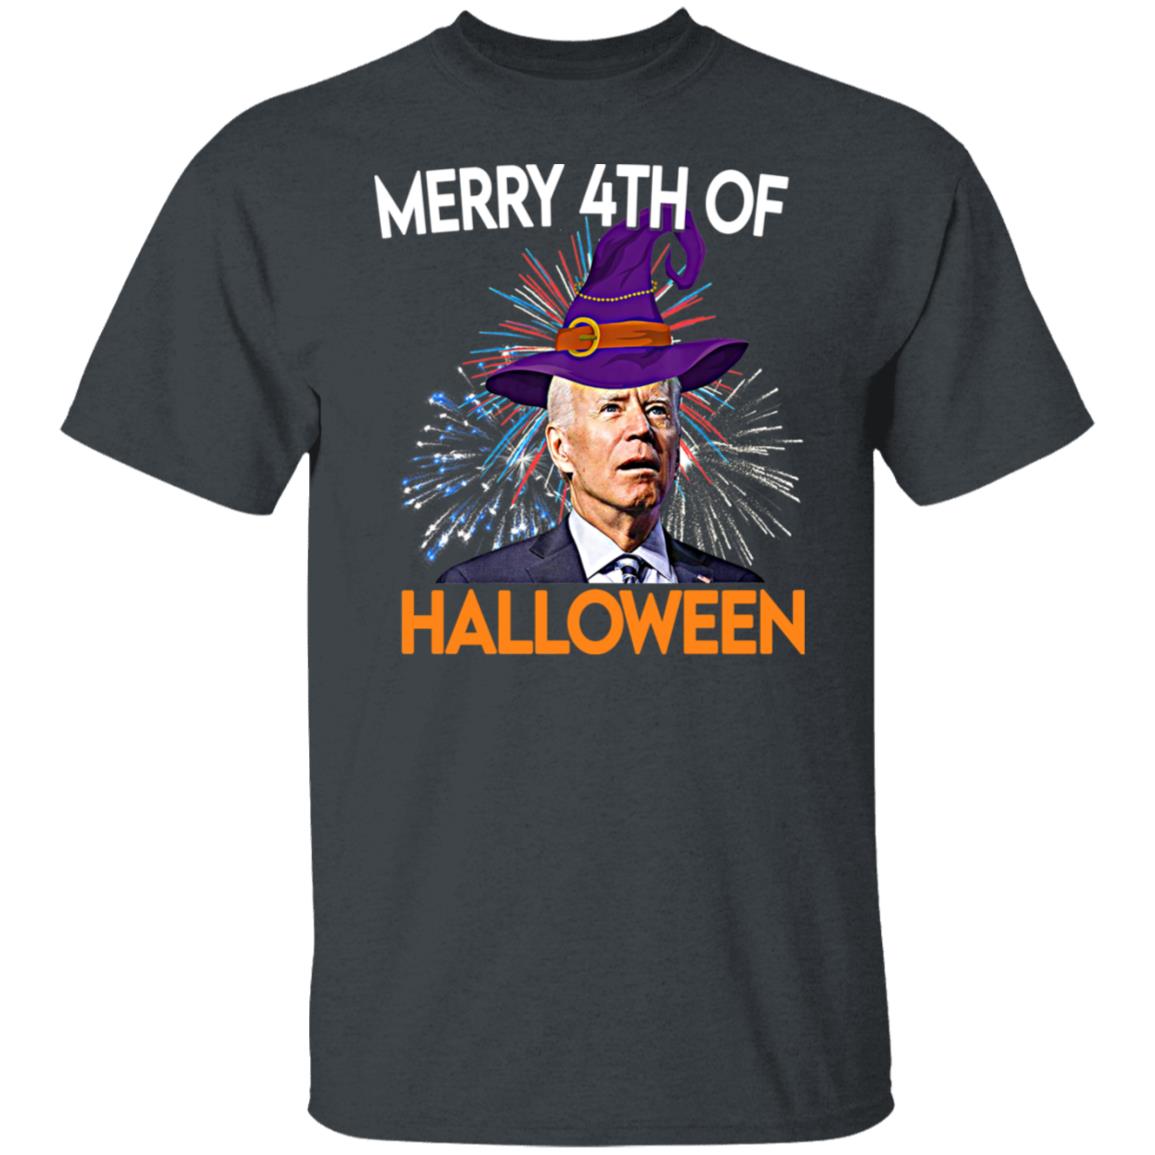 Funny Merry 4th Of Halloween T-Shirt